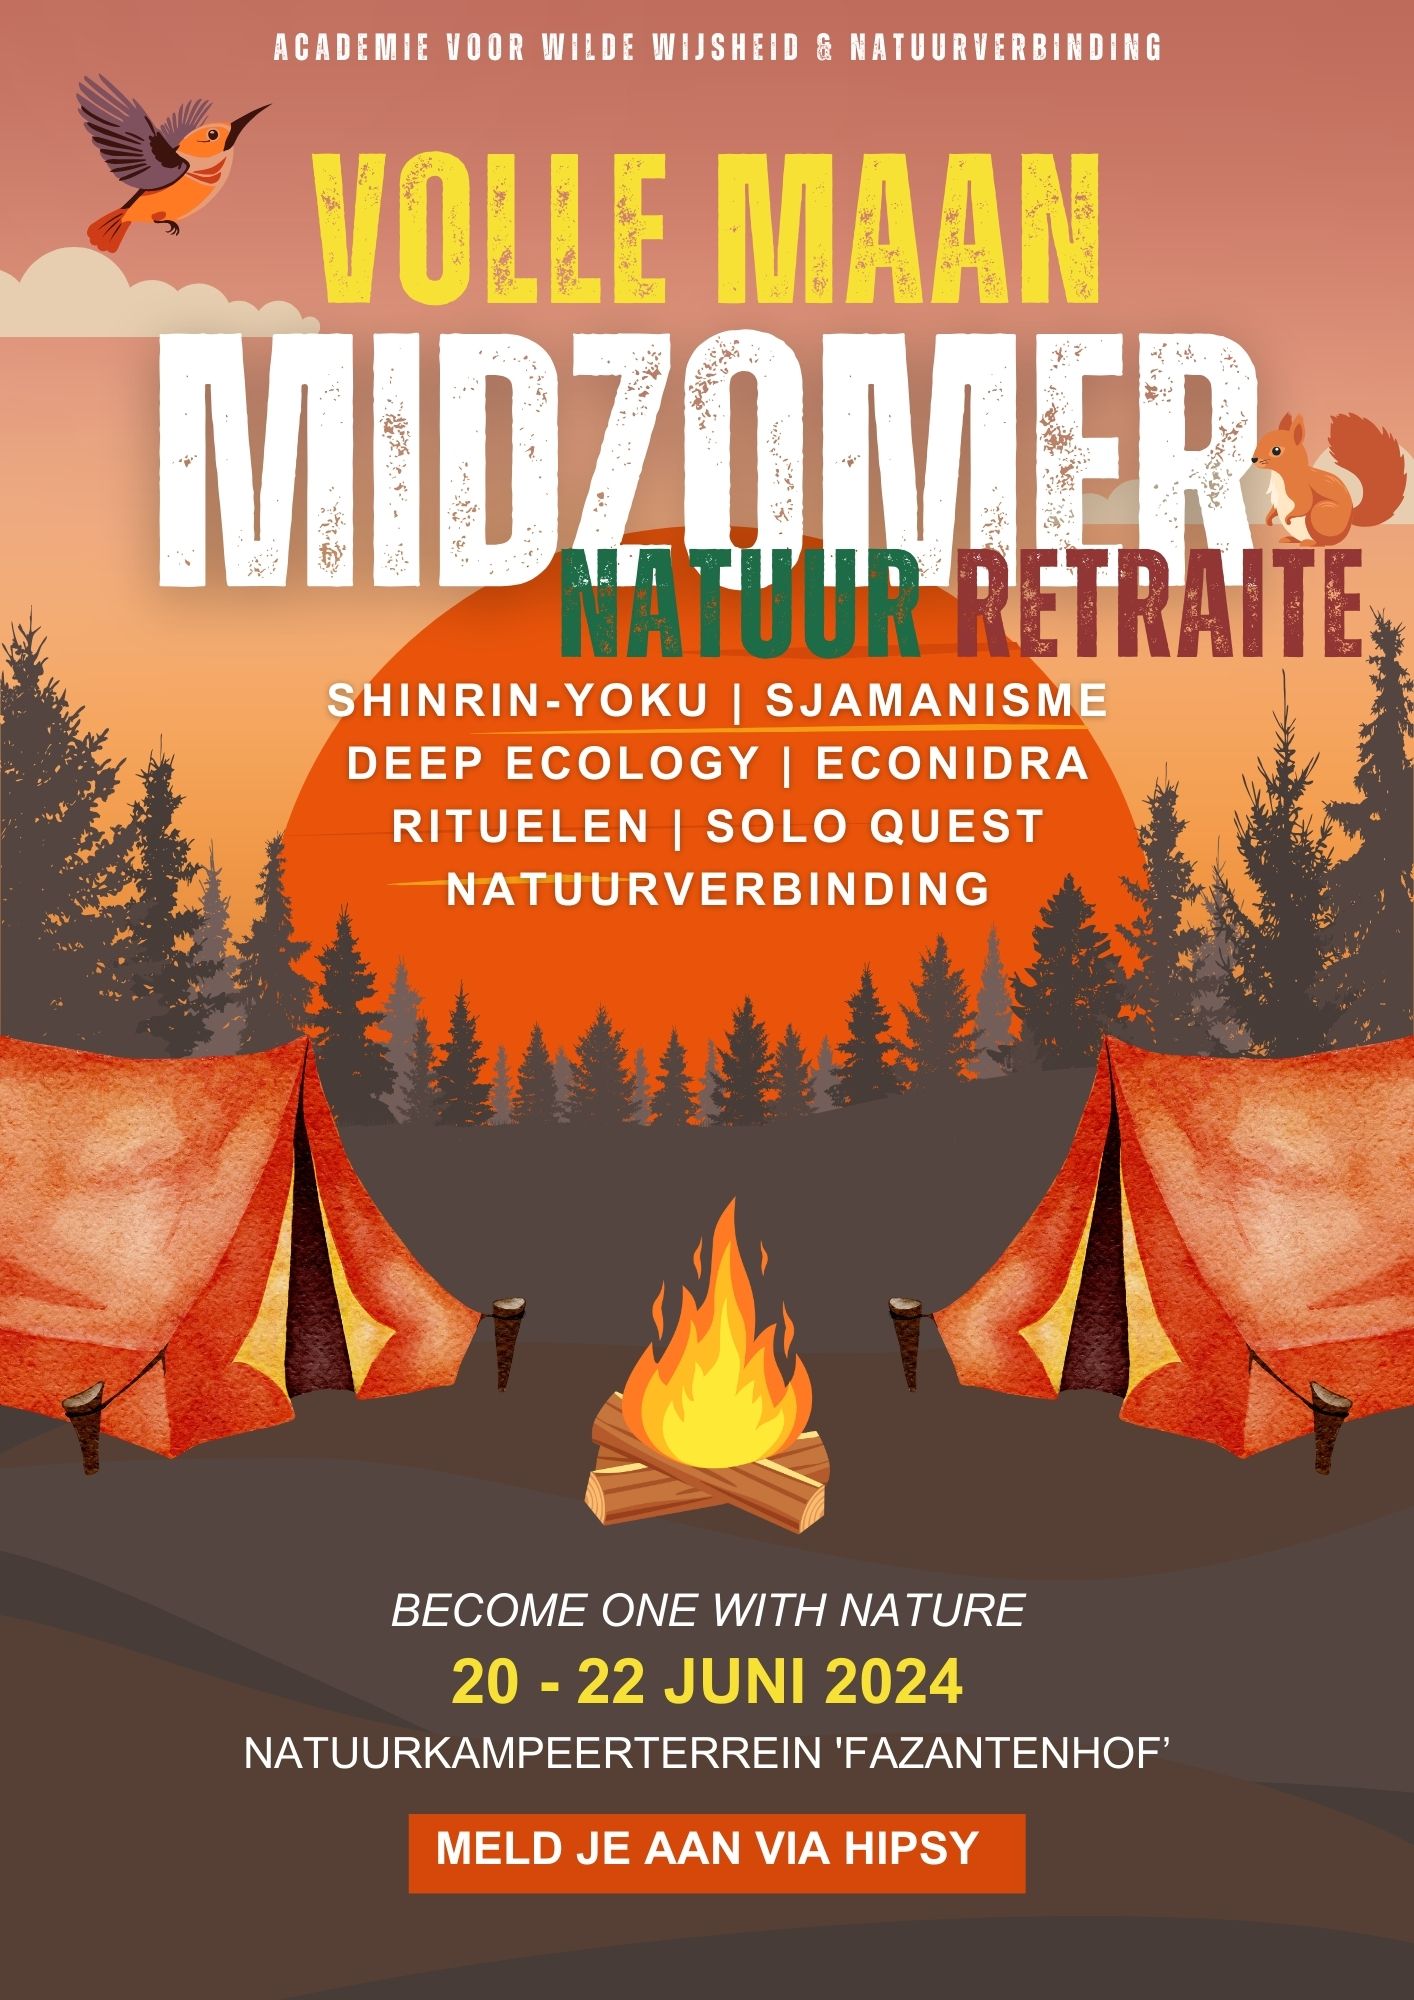 Volle Maan Midzomer Natuur Retraite “Become one with Nature!”